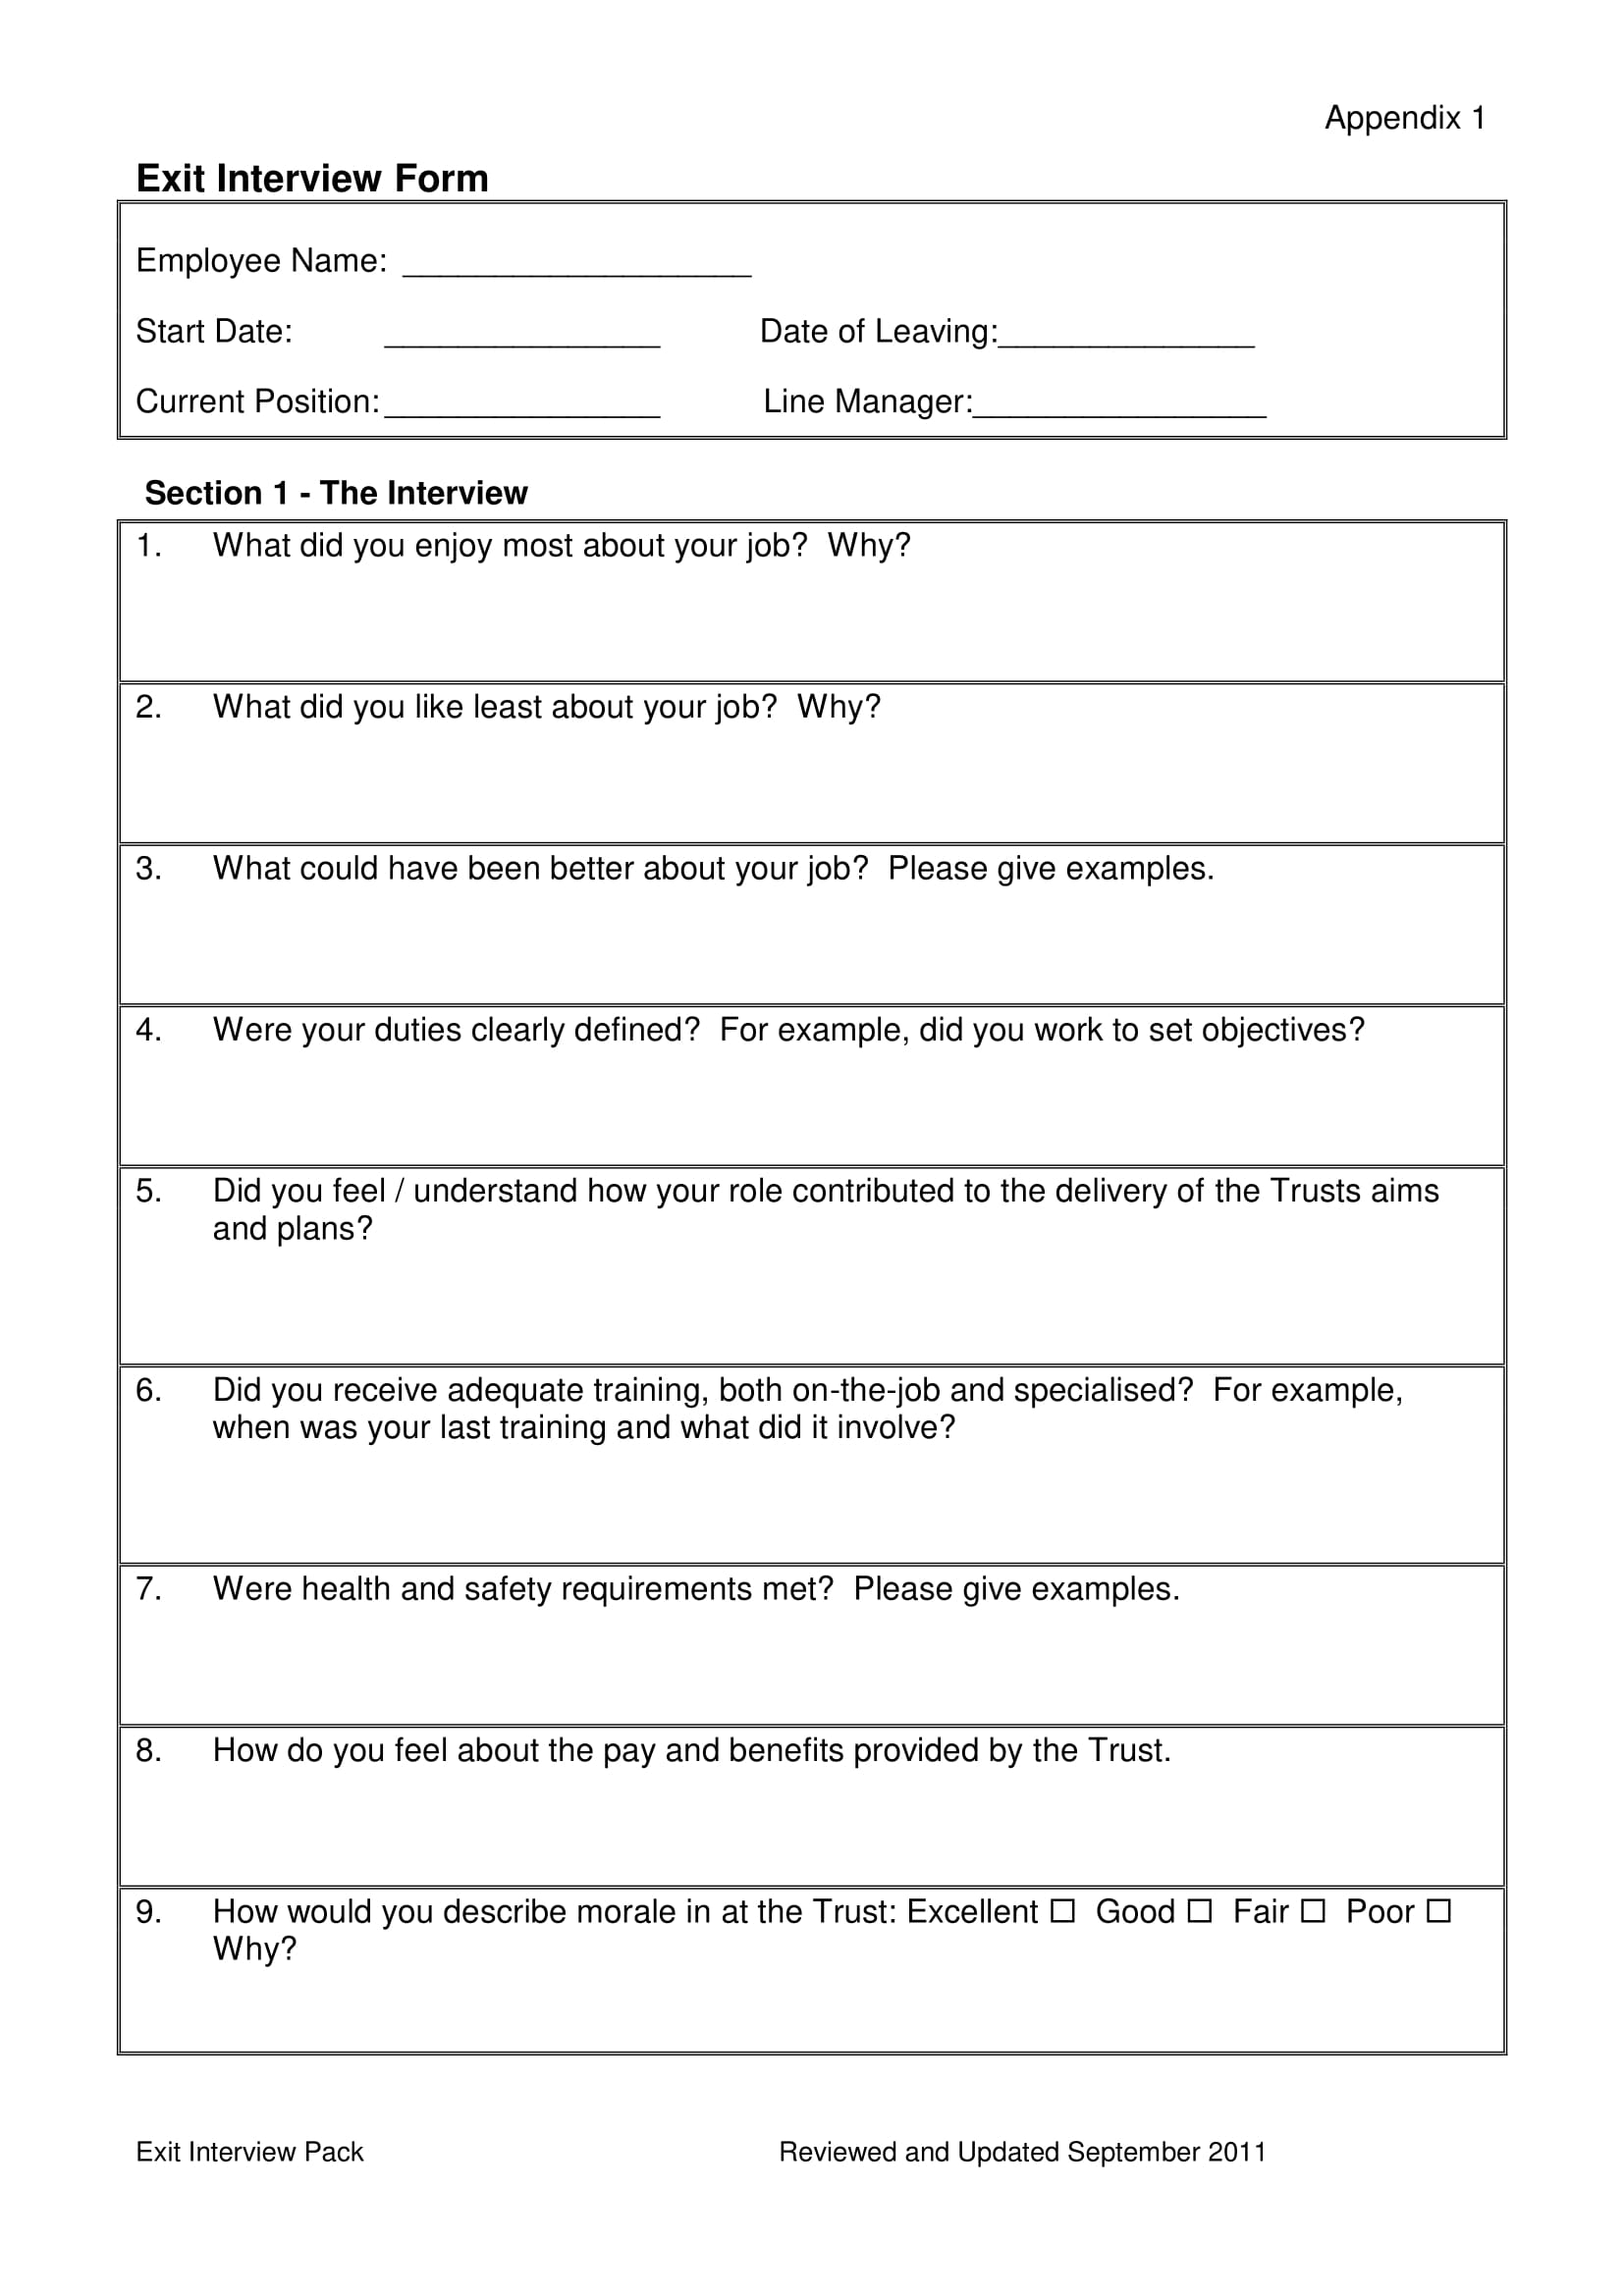 exit interview form example